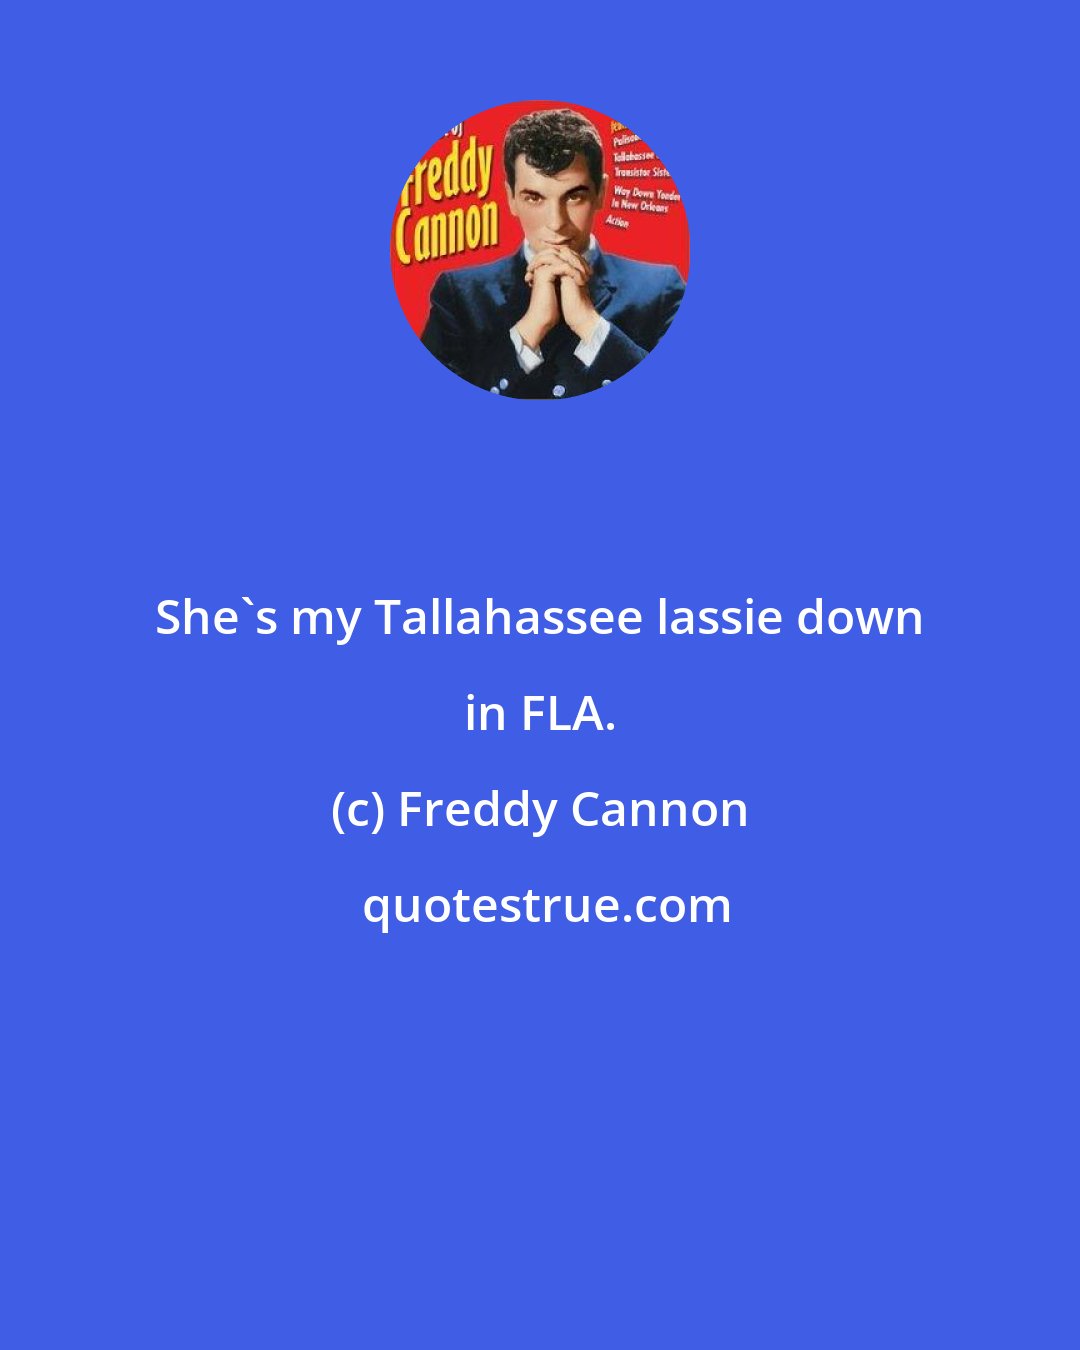 Freddy Cannon: She's my Tallahassee lassie down in FLA.